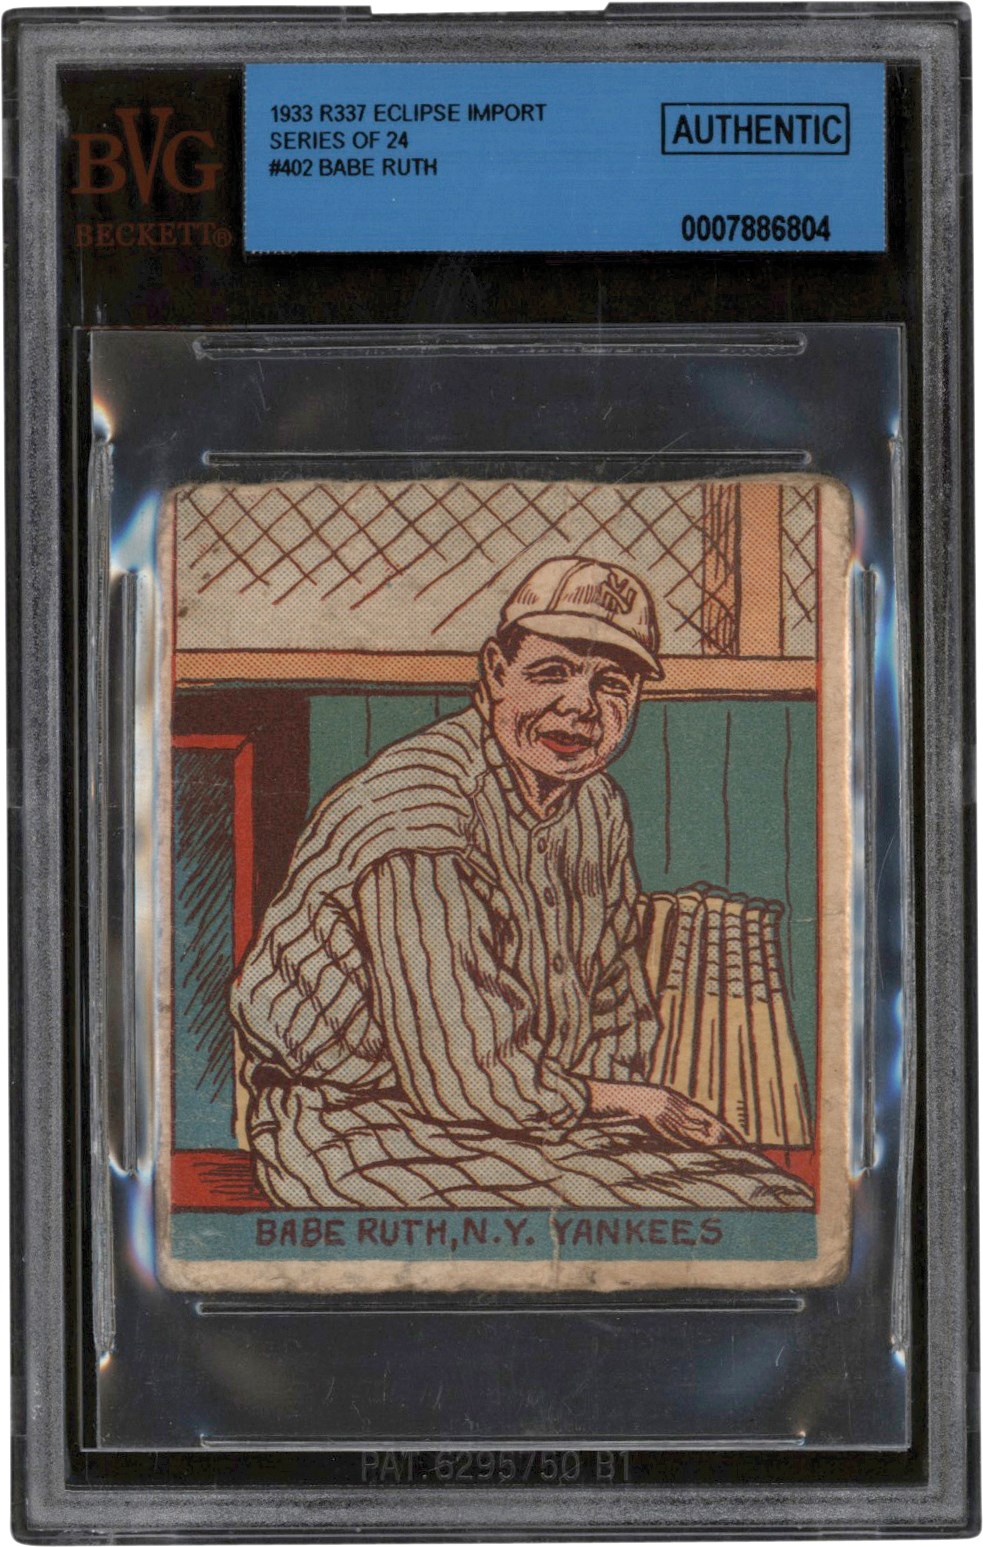 933 R337 Eclipse Import #402 Babe Ruth BVG Authentic